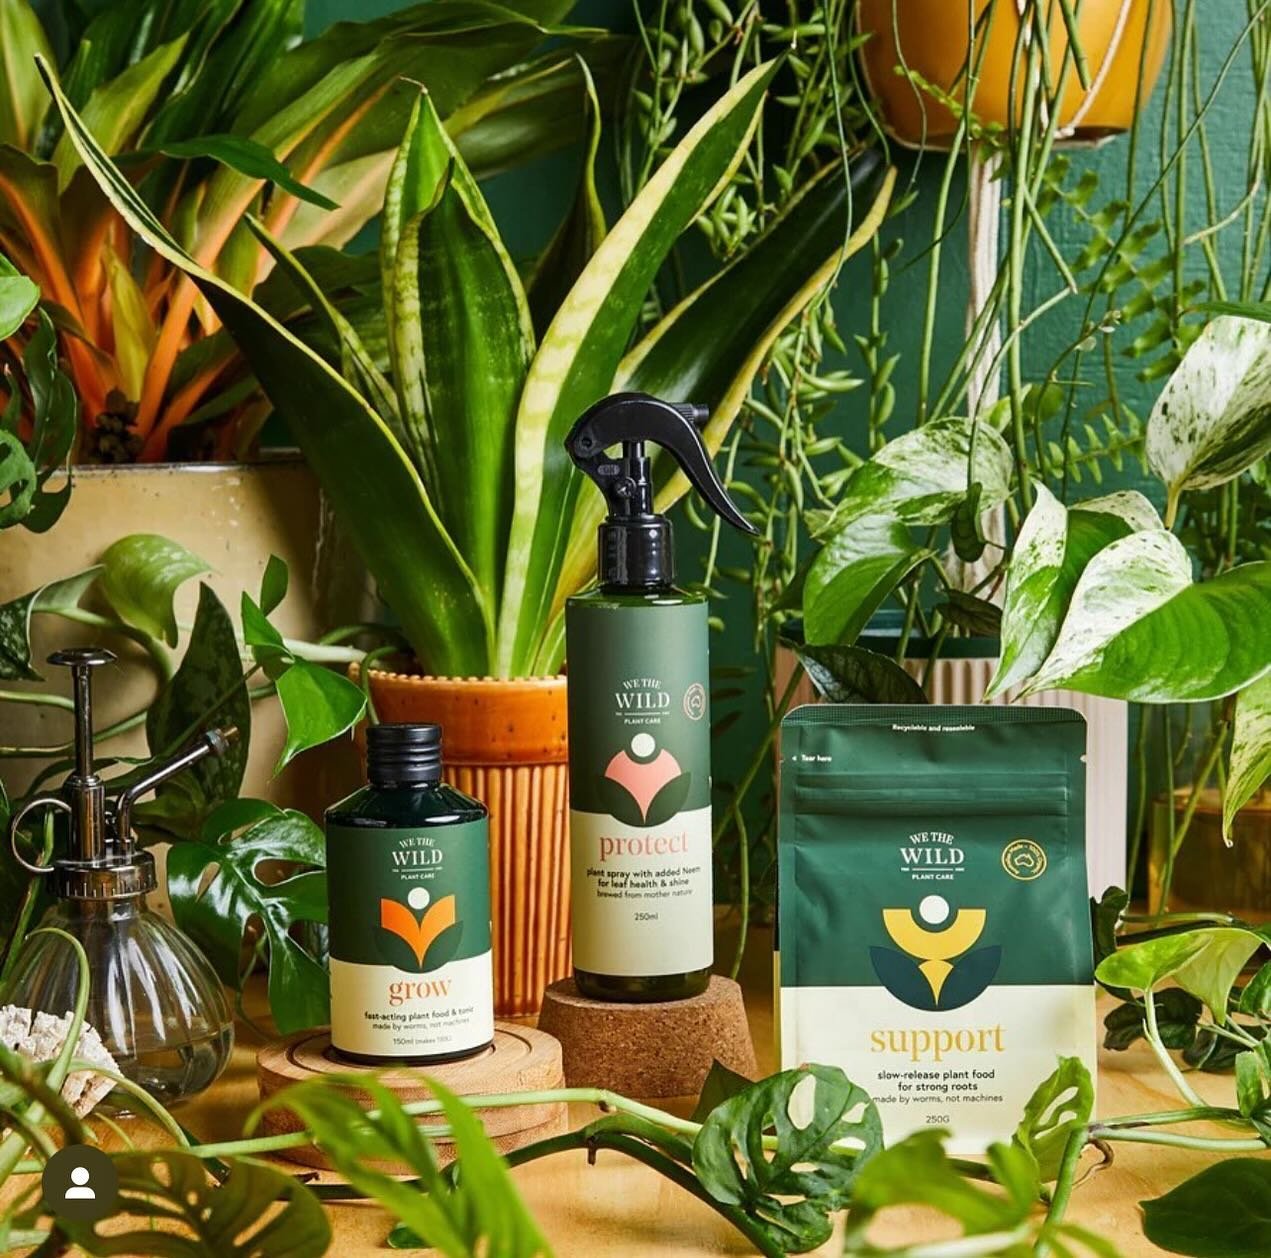 Let&rsquo;s talk Plant Care 🪴 
Did you know plants need caring for too? 
They not only need Water 💦 but they need Food 🍃 and Light ☀️ to thrive &hellip; Oh and love too 🥰 
Add in @wethewildofficial Plant Care and watch your plants transform, with